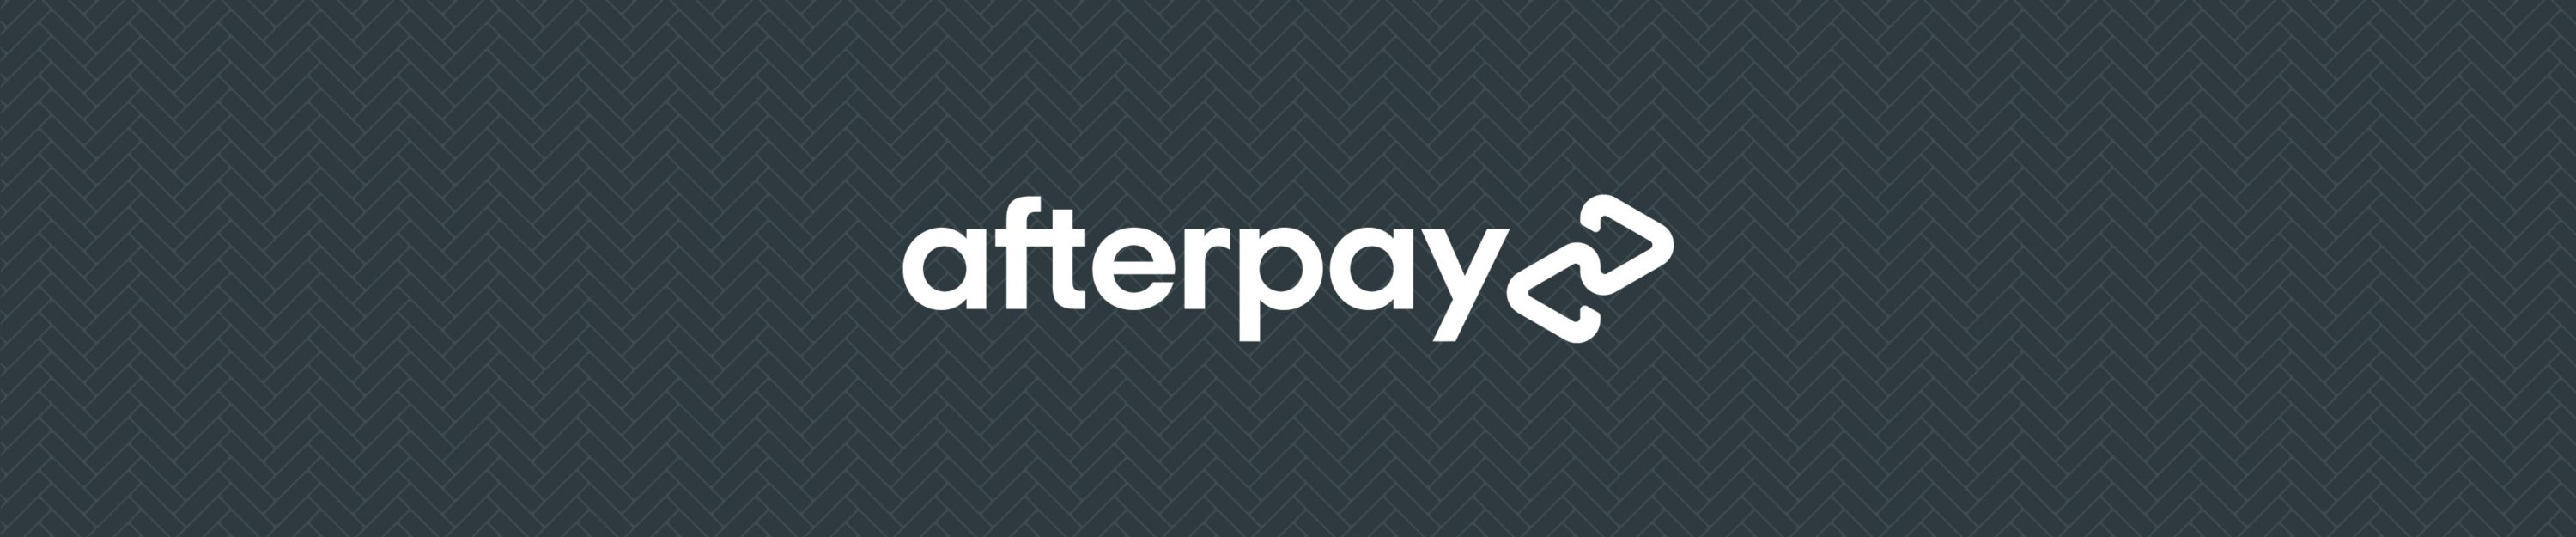 after pay logo